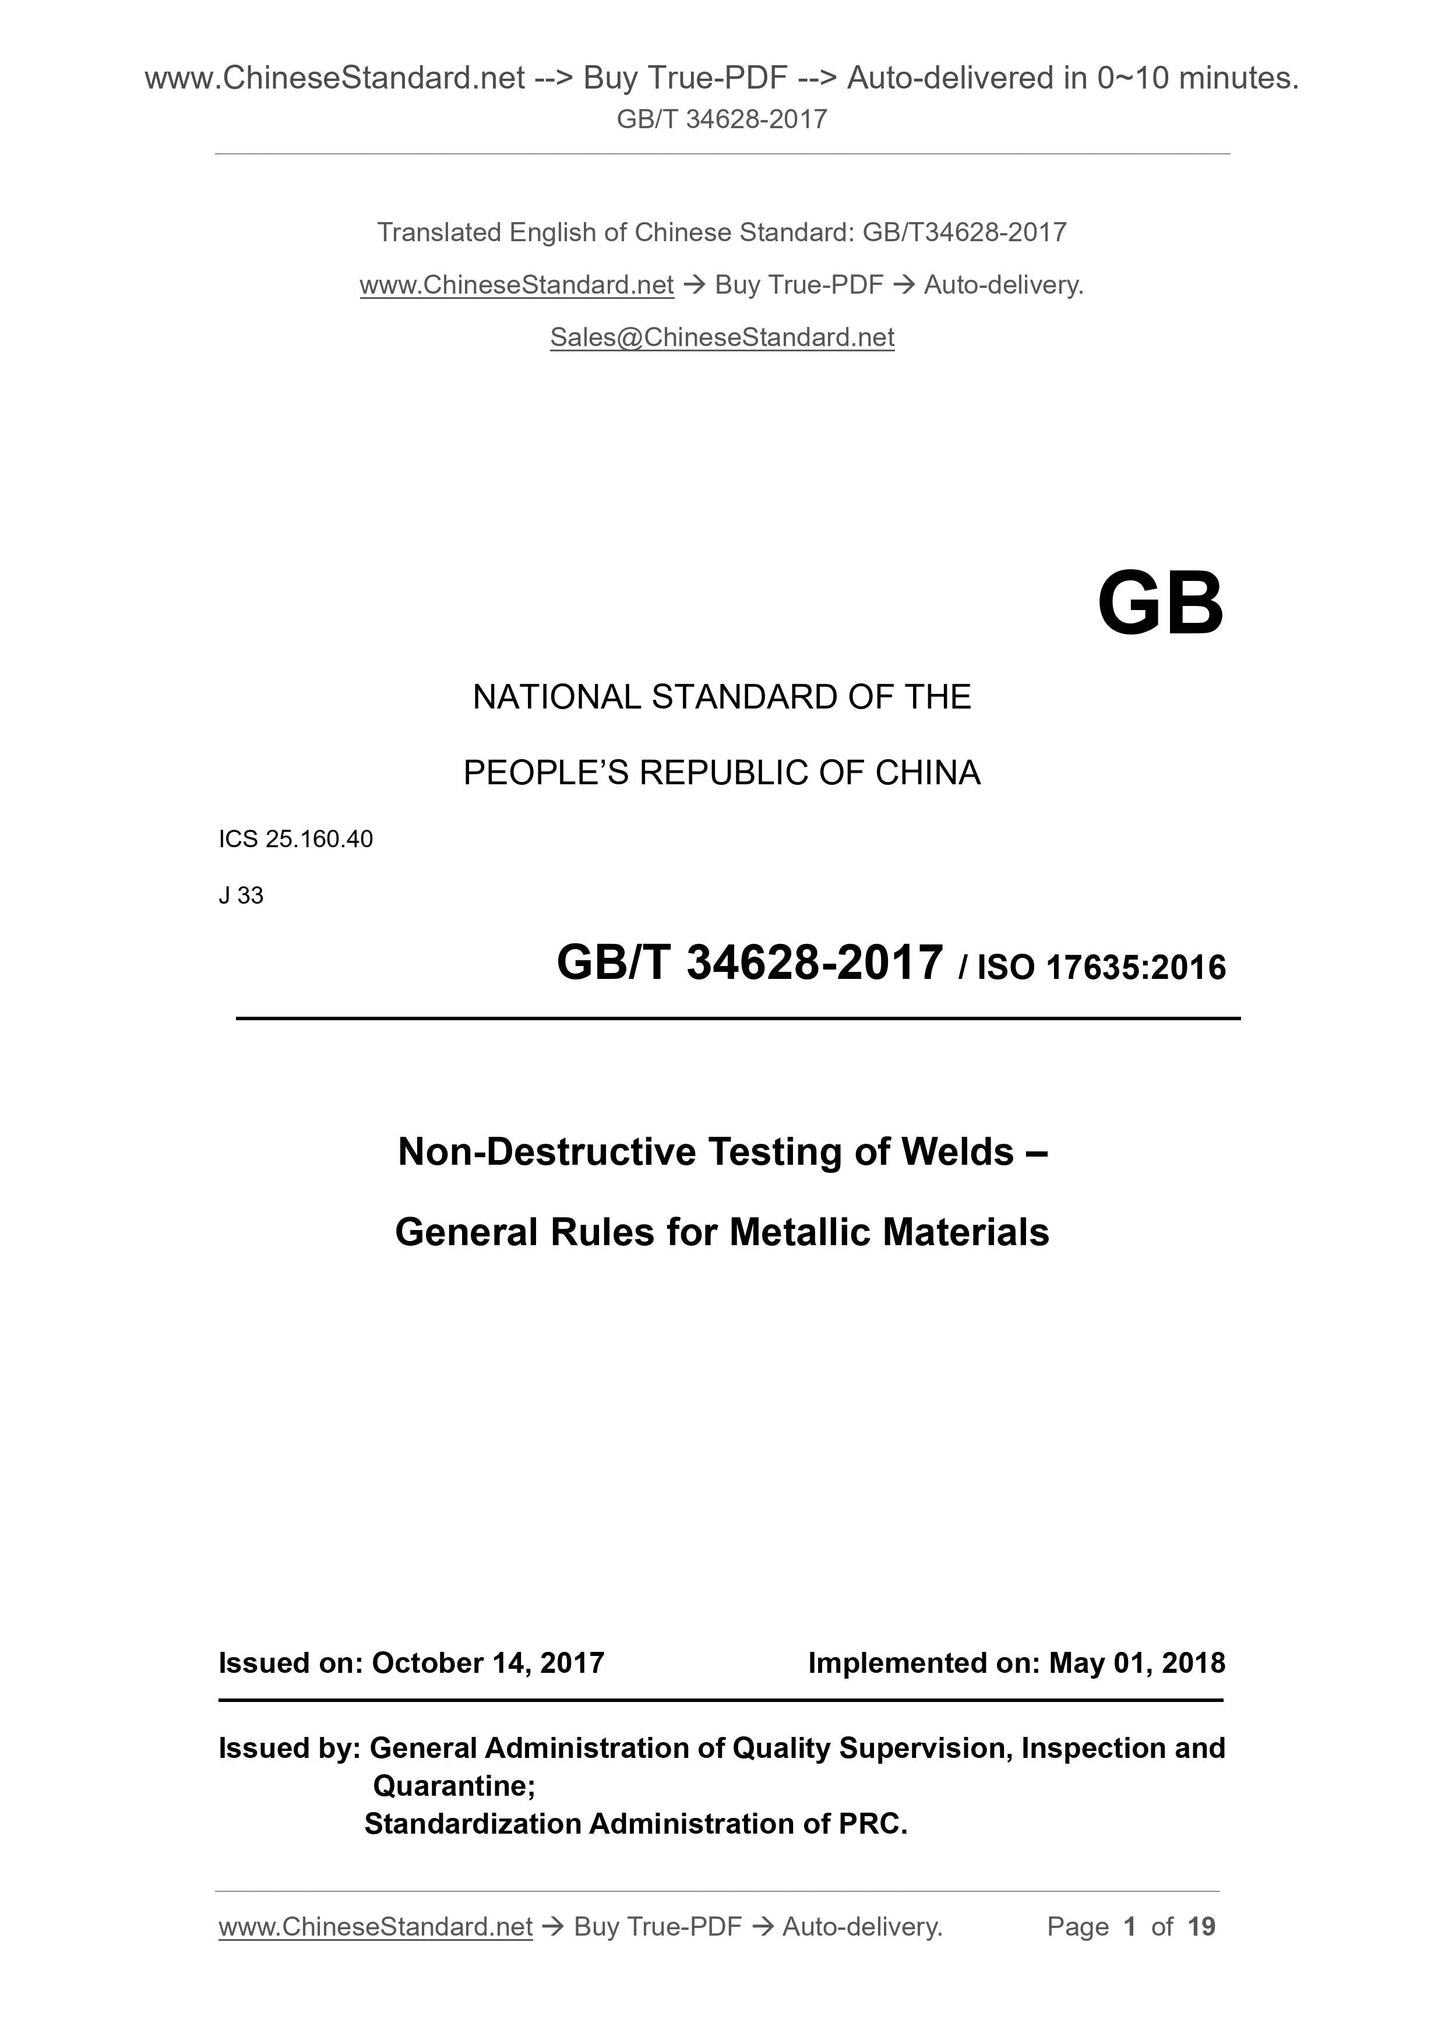 GB/T 34628-2017 Page 1